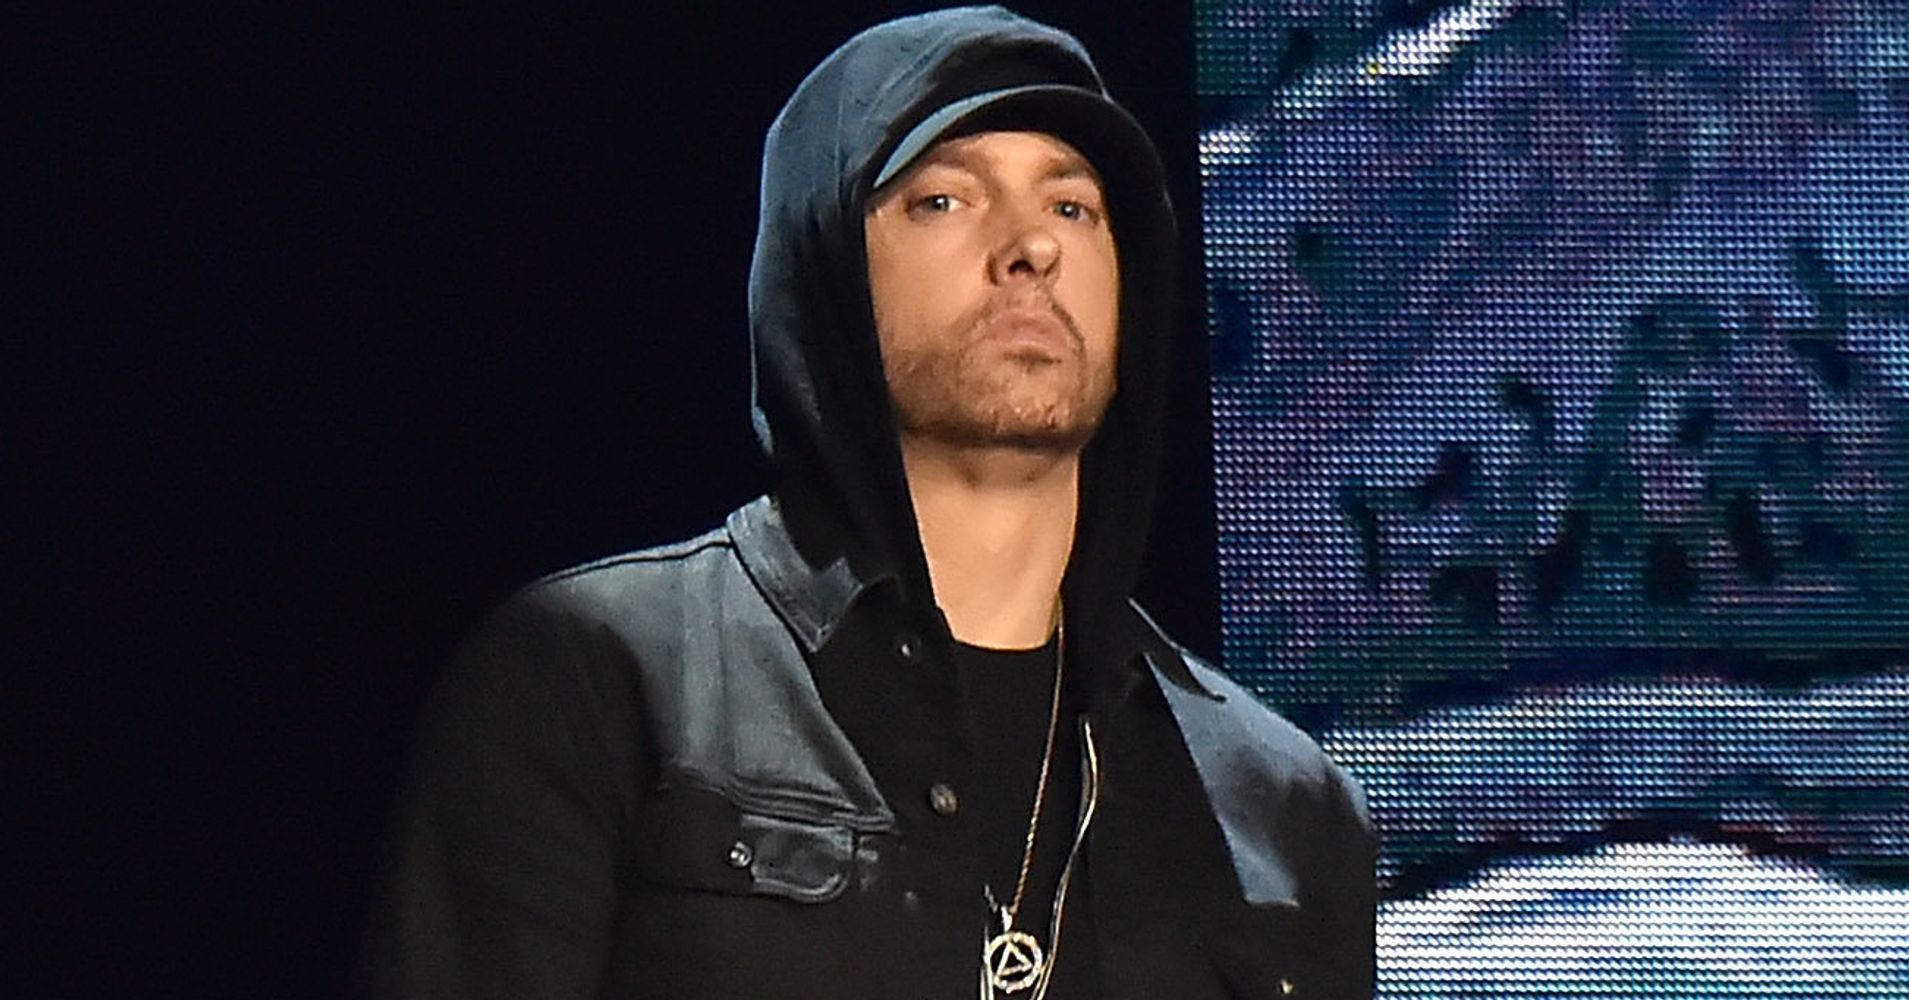 Eminem Rips Systemic Racism And White Privilege In New Anthem 'Untouchable' | HuffPost